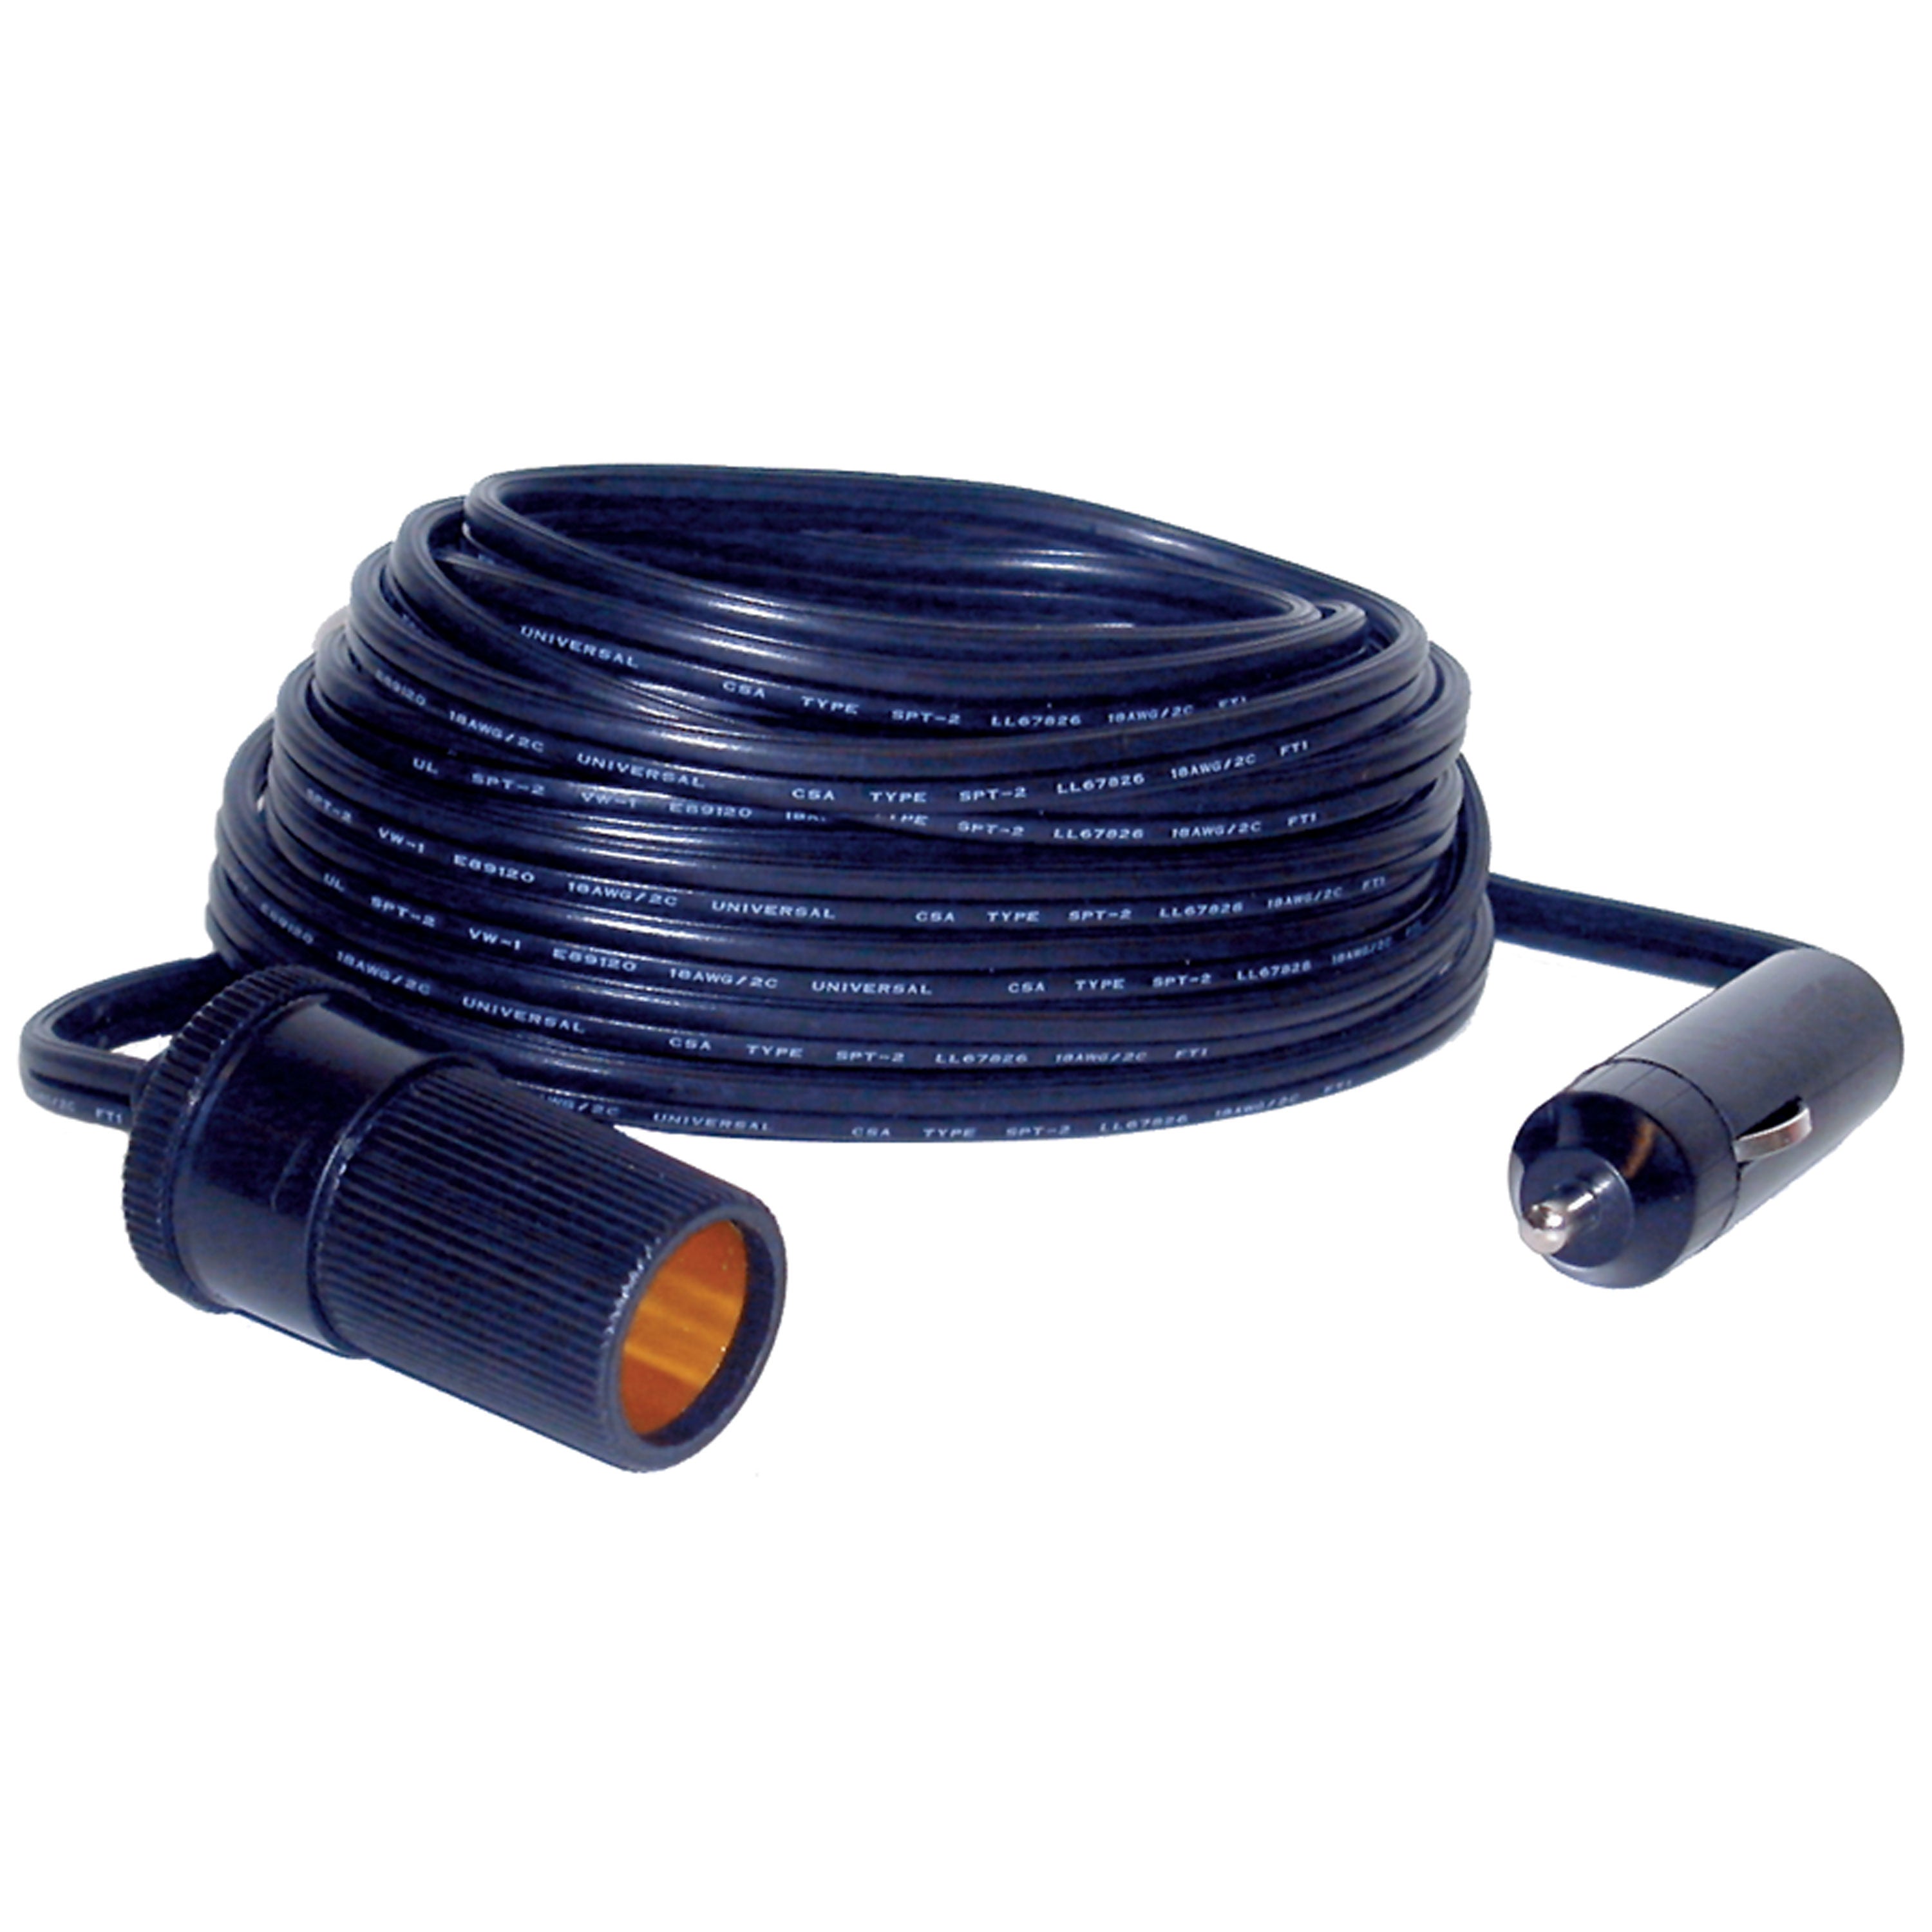 Prime Products 08-0917 25' Adapter Plug Extension Cord